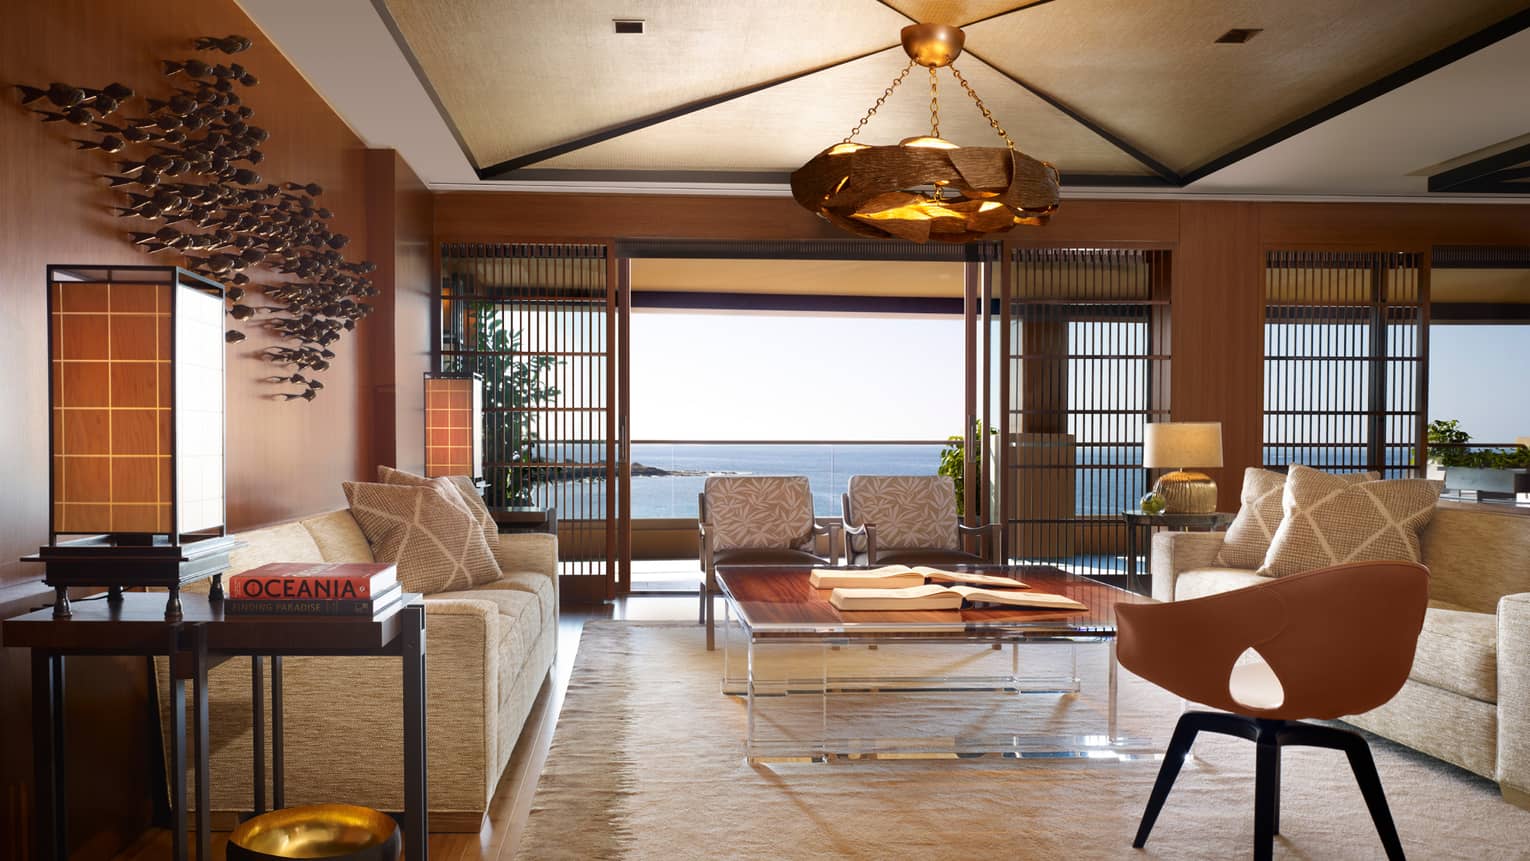 Alii Royal Suite spacious seating area with bespoke furnishings, mid-century style sofas, chairs, light